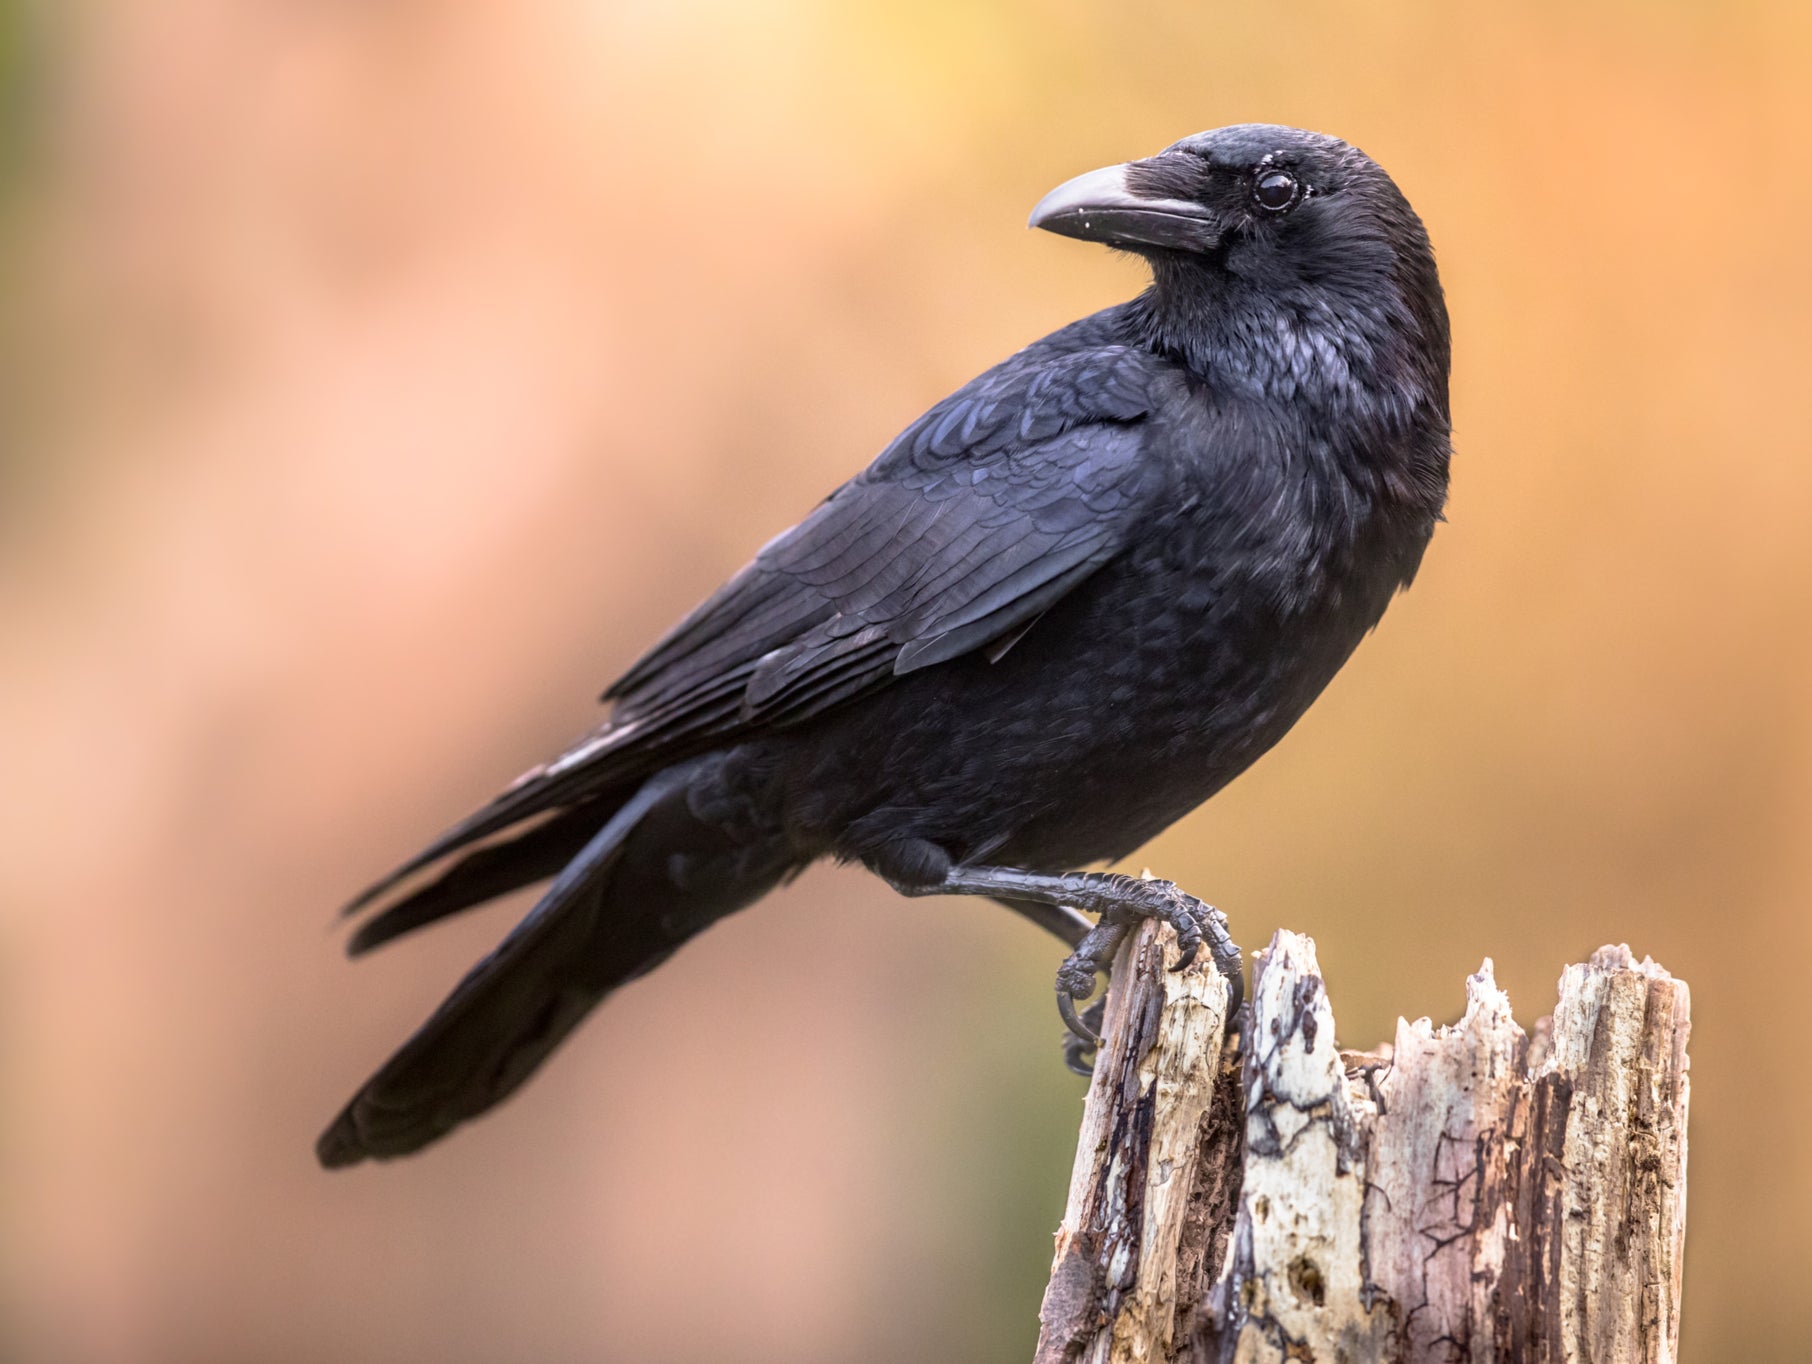 Researchers in Germany have discovered crows are capable of consciously perceiving sensory impressions